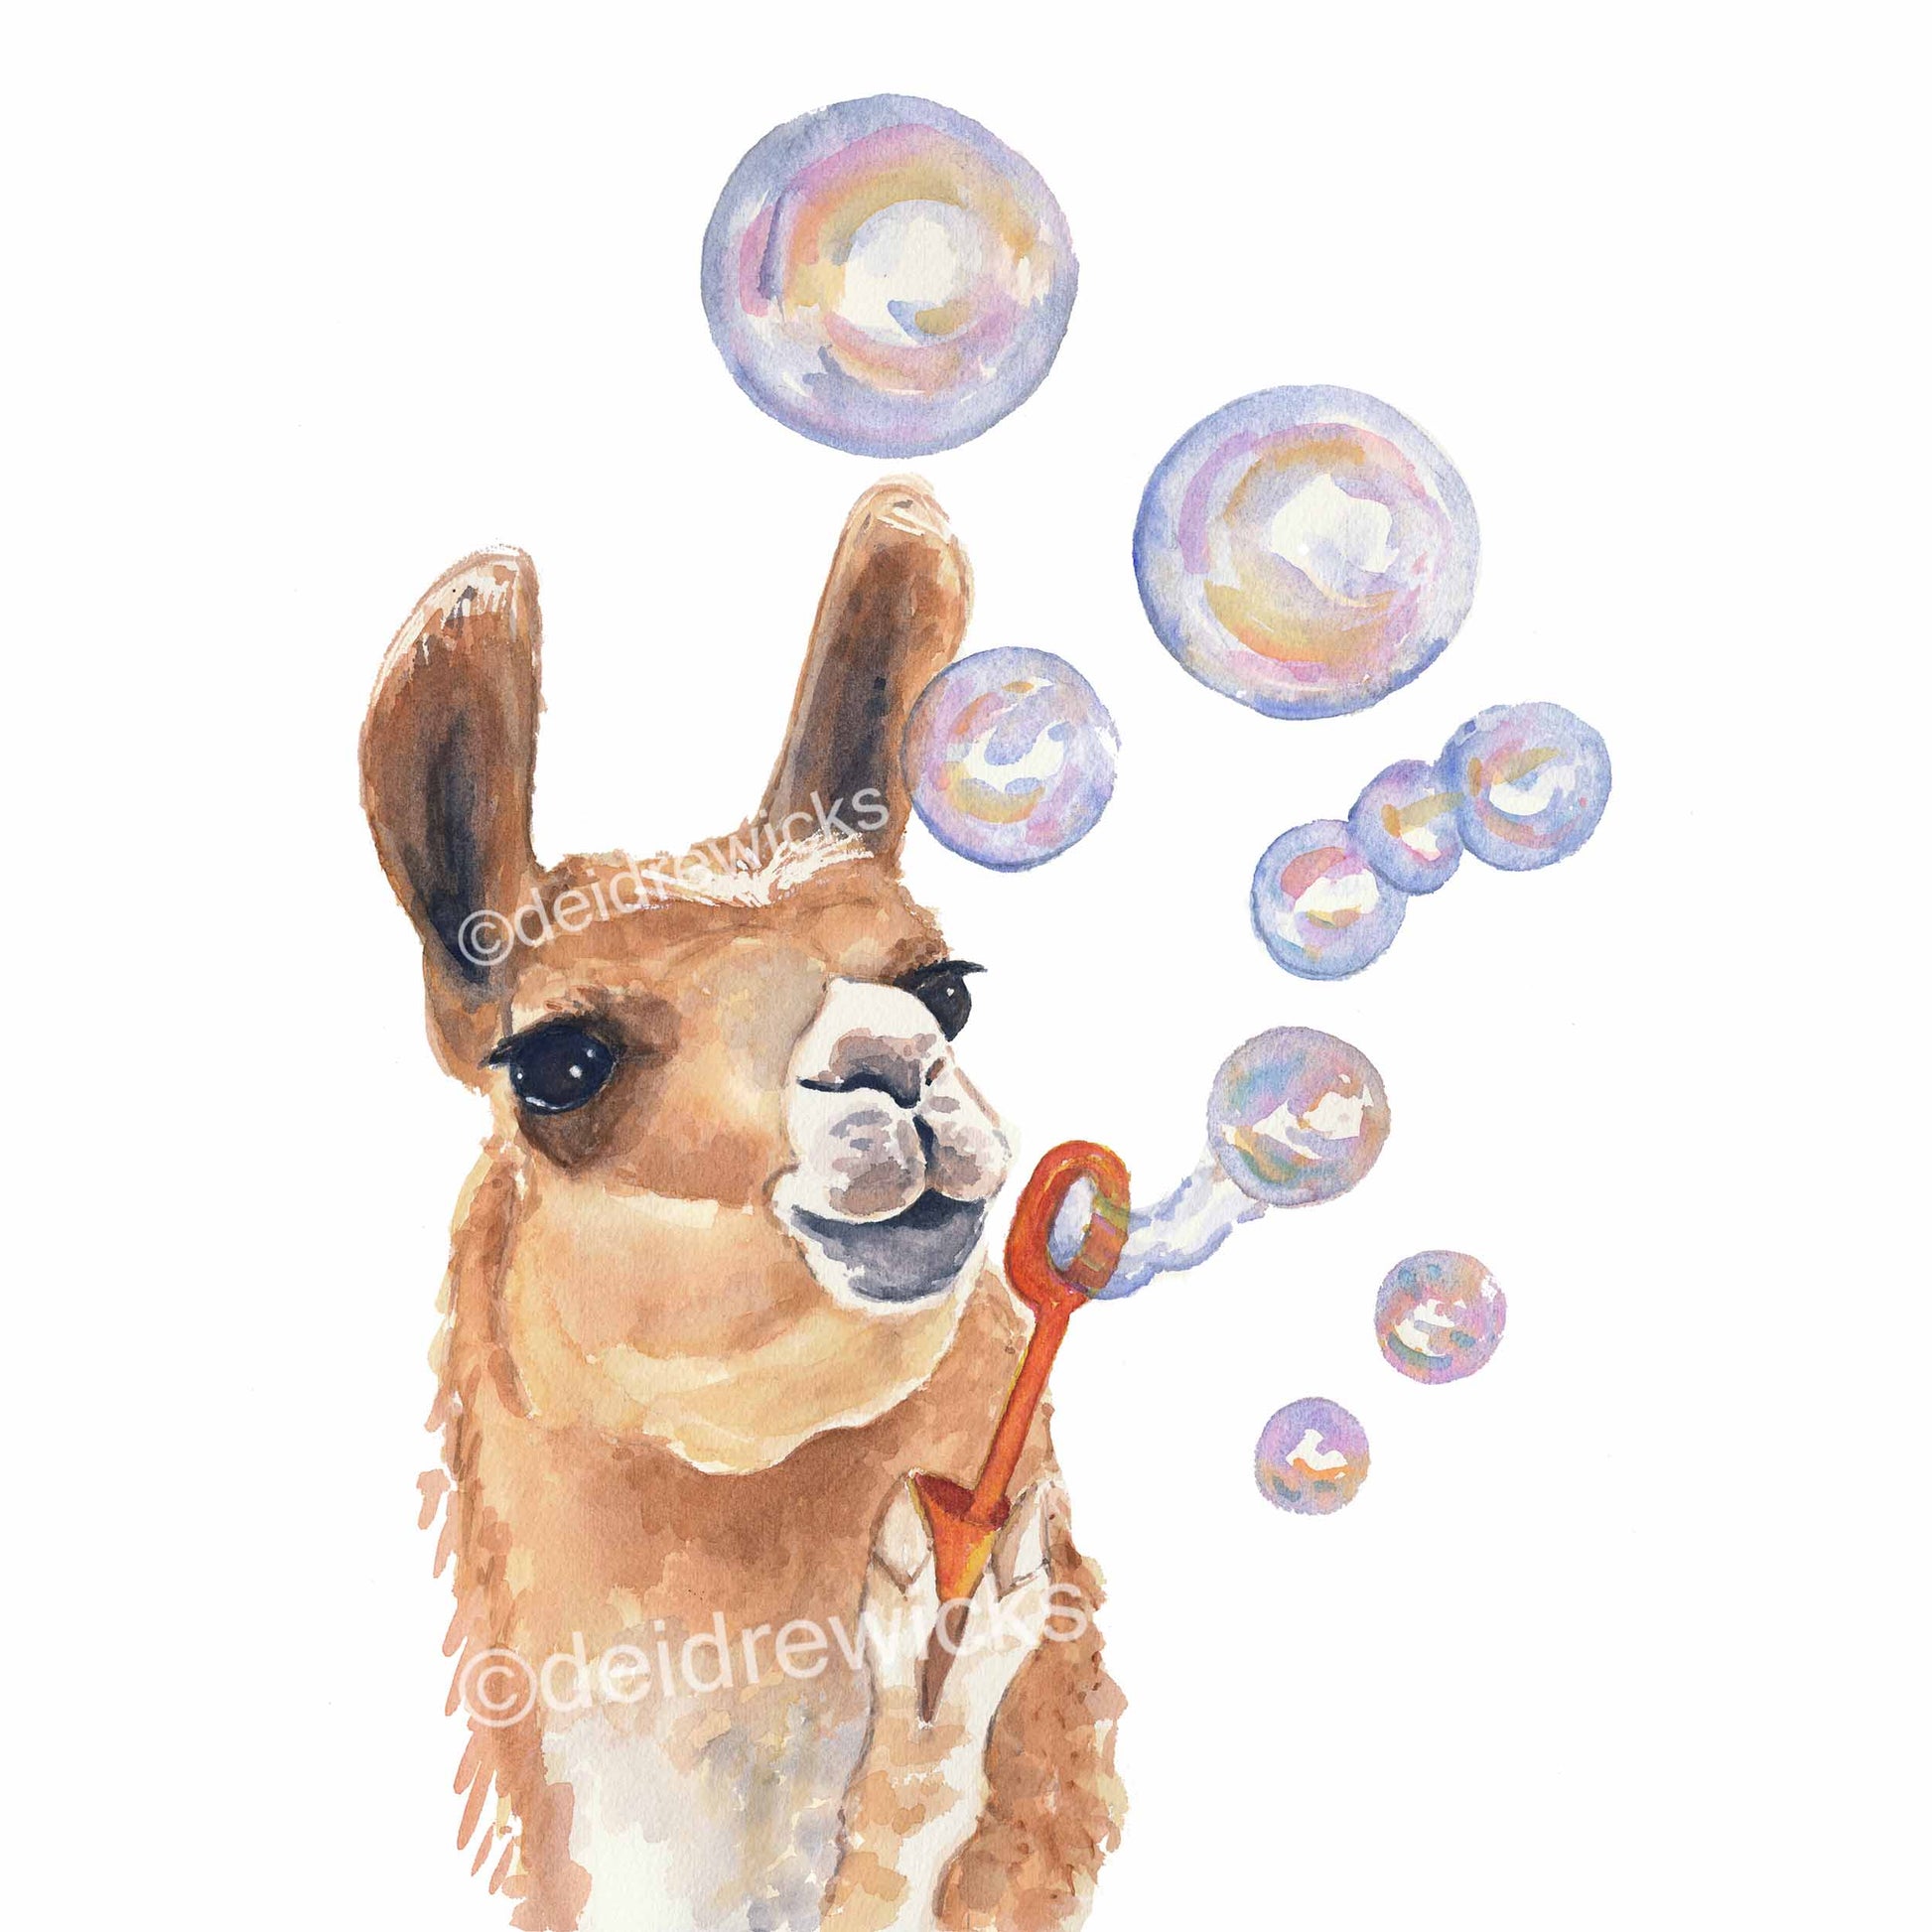 Watercolor painting of a llama blowing bubbles by Deidre Wicks